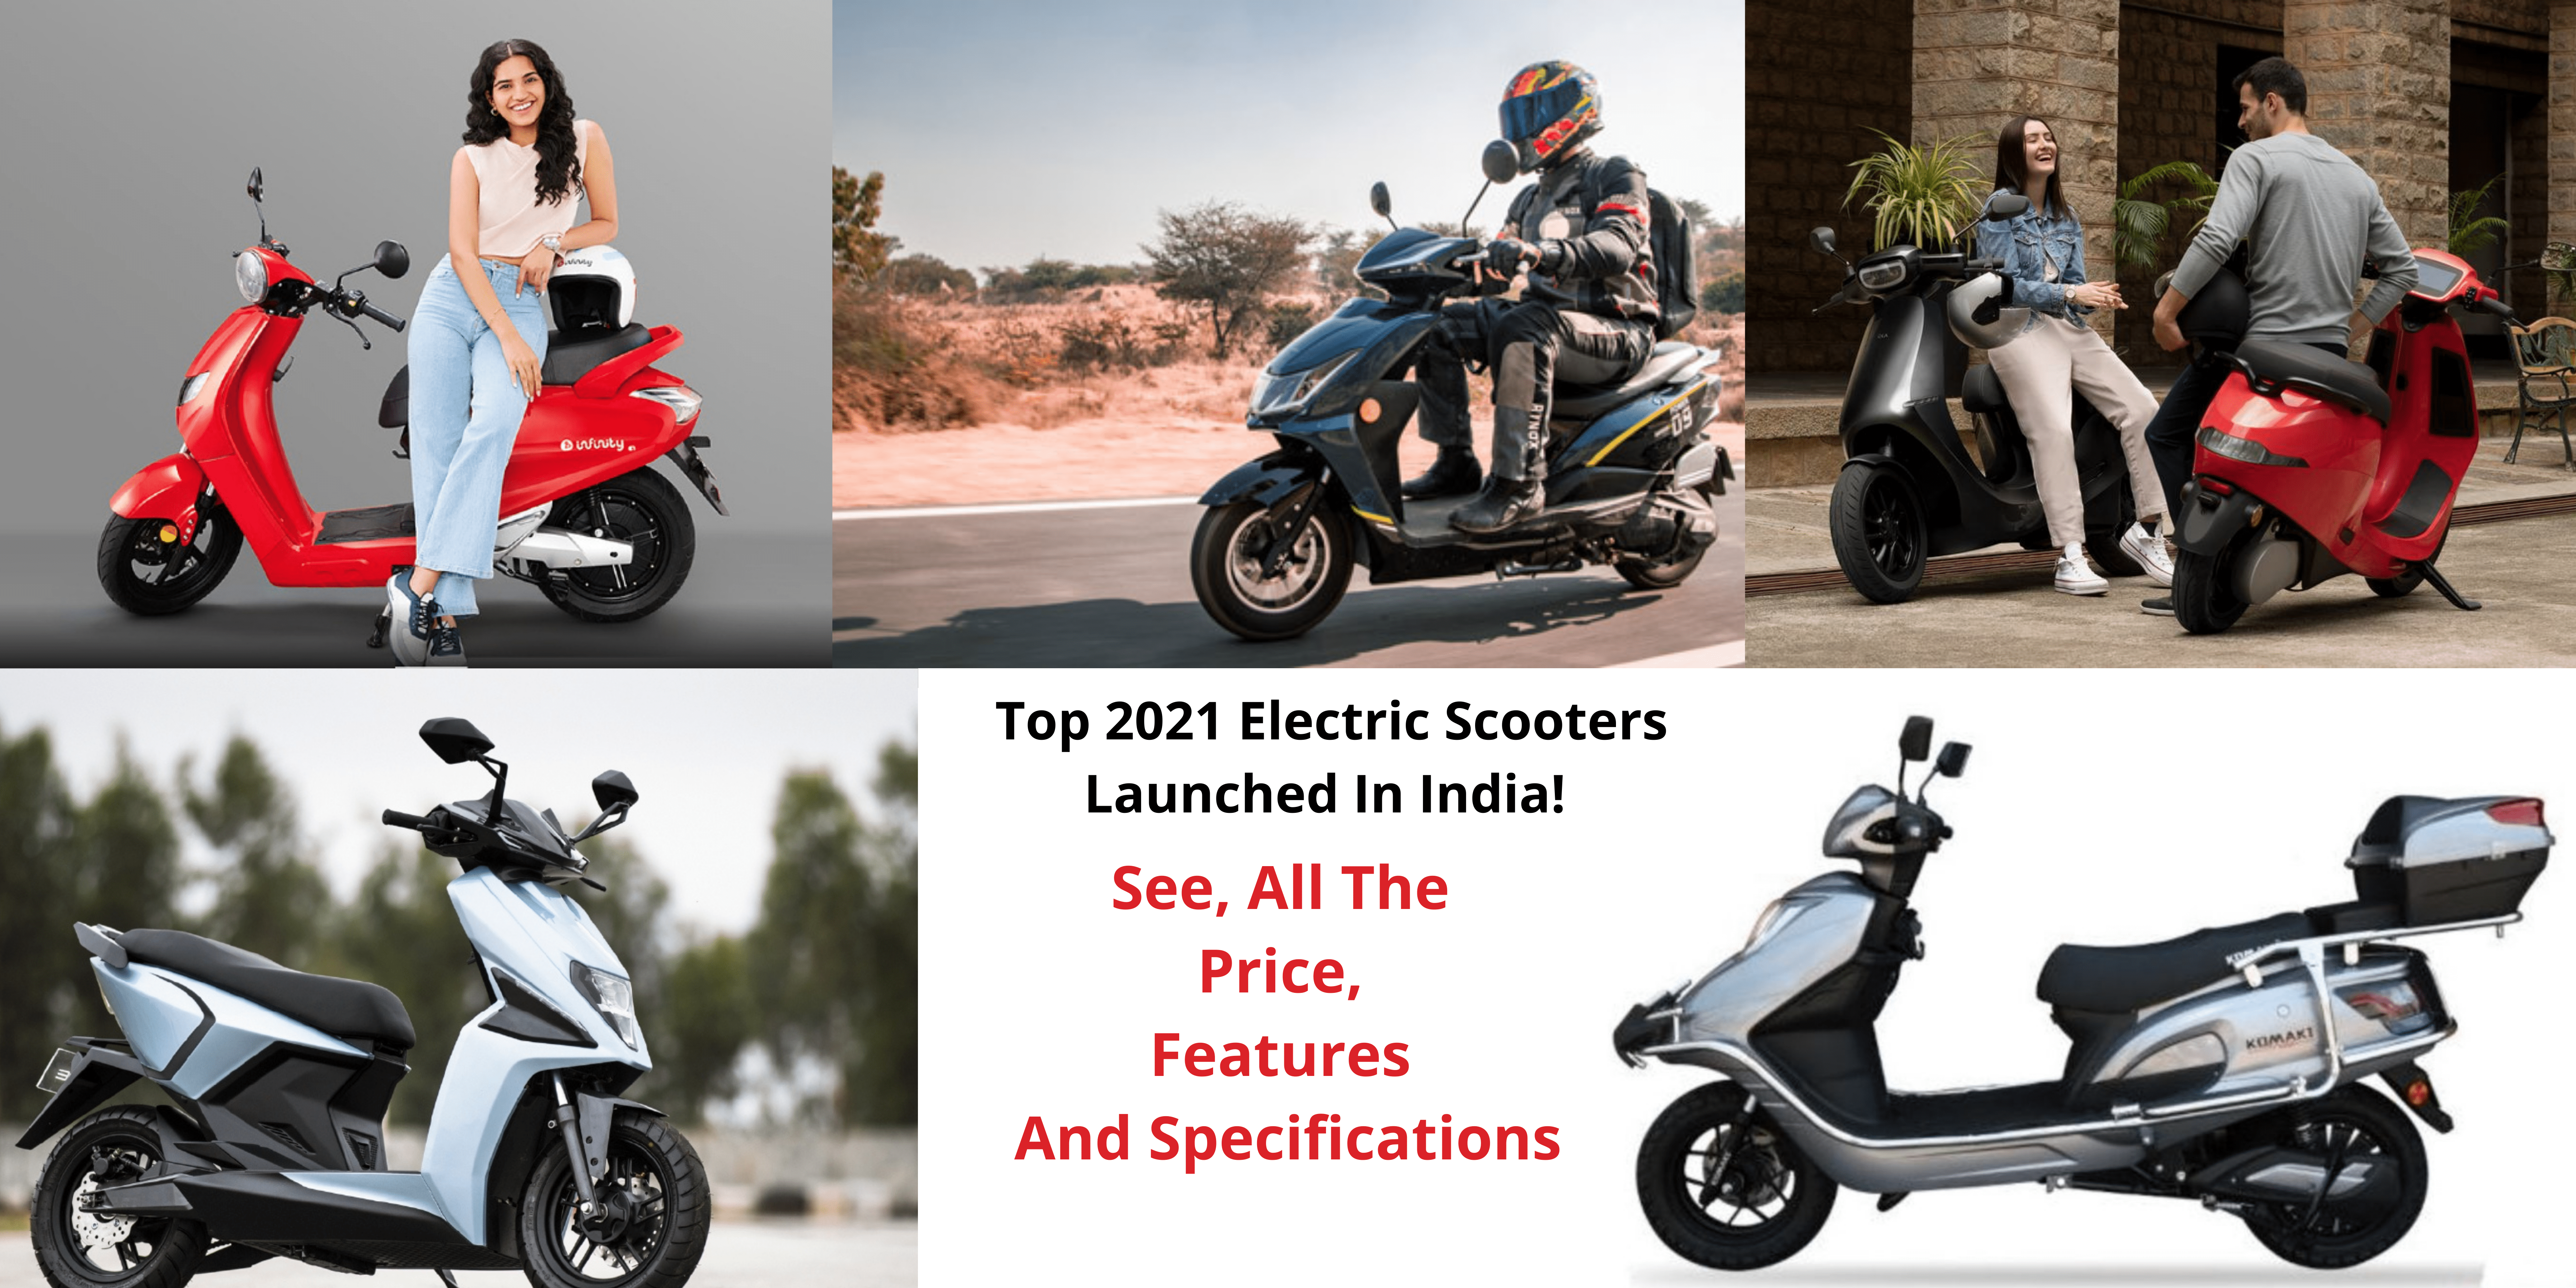 Top 2021 Electric Scooters Launched In India